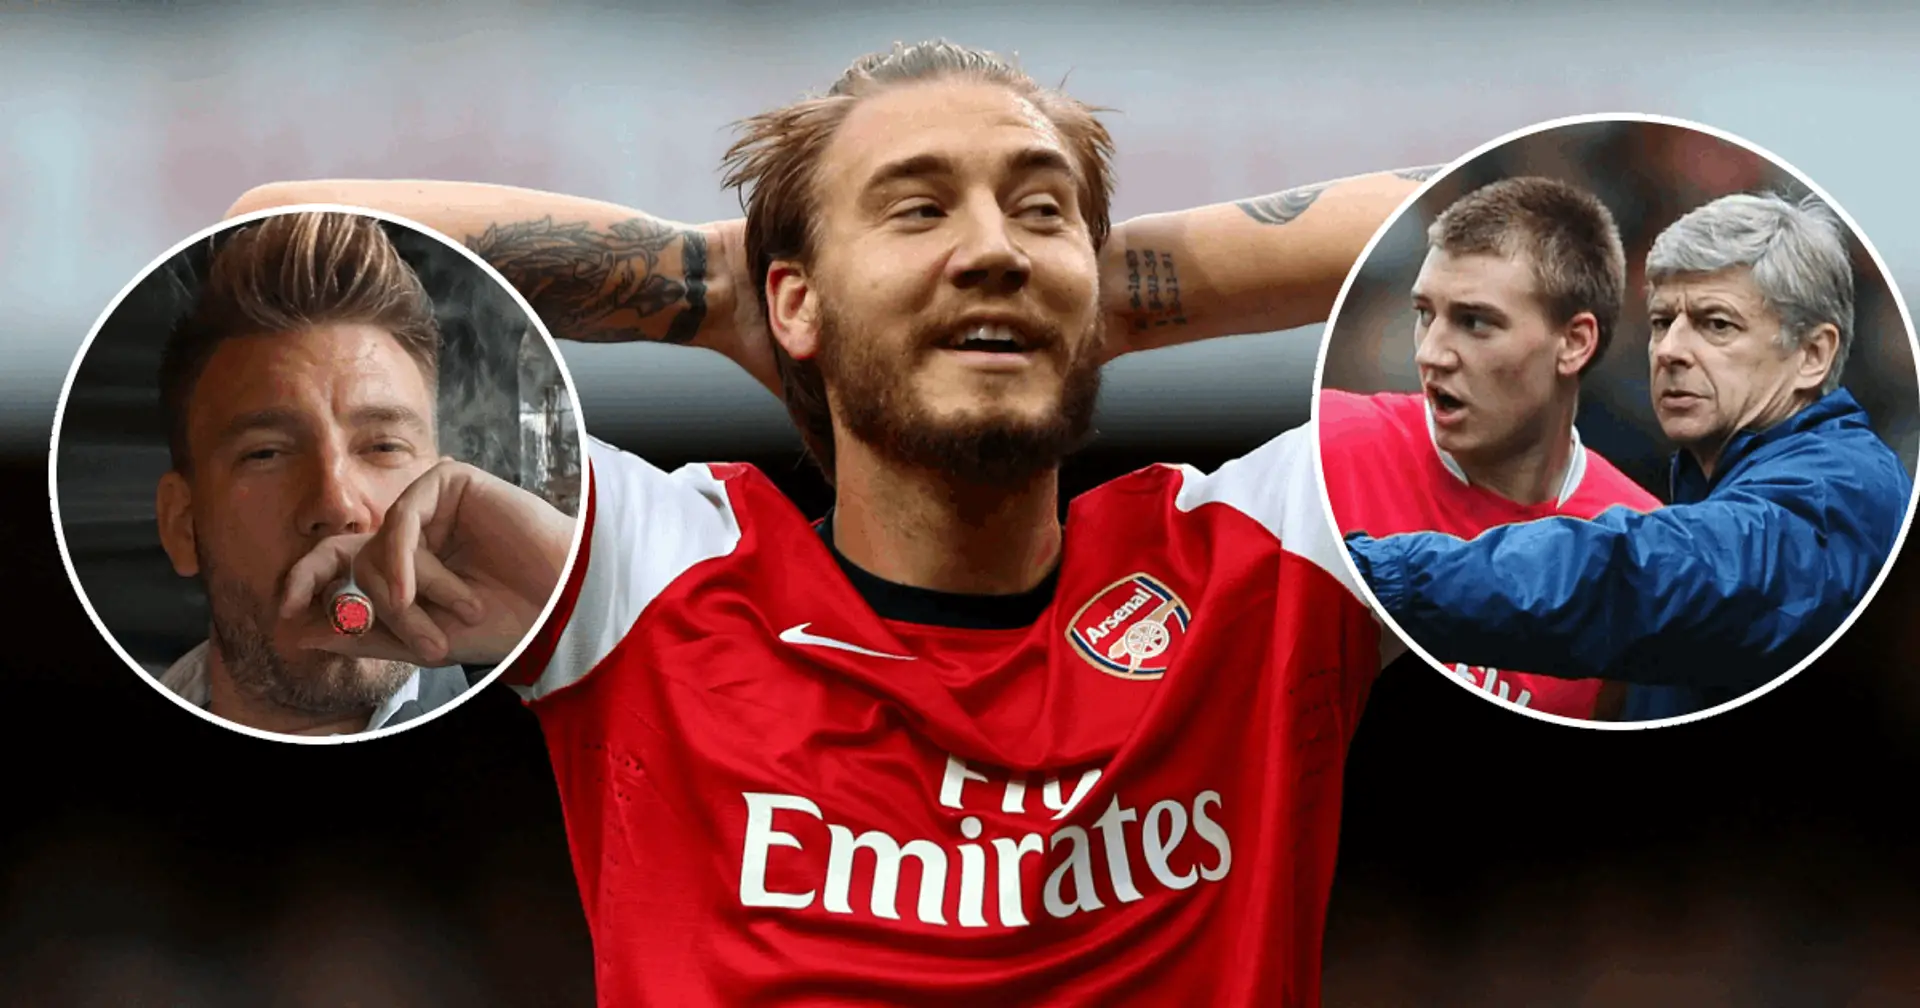 Nicklas Bendtner retires from football, announces plans to be become a coach